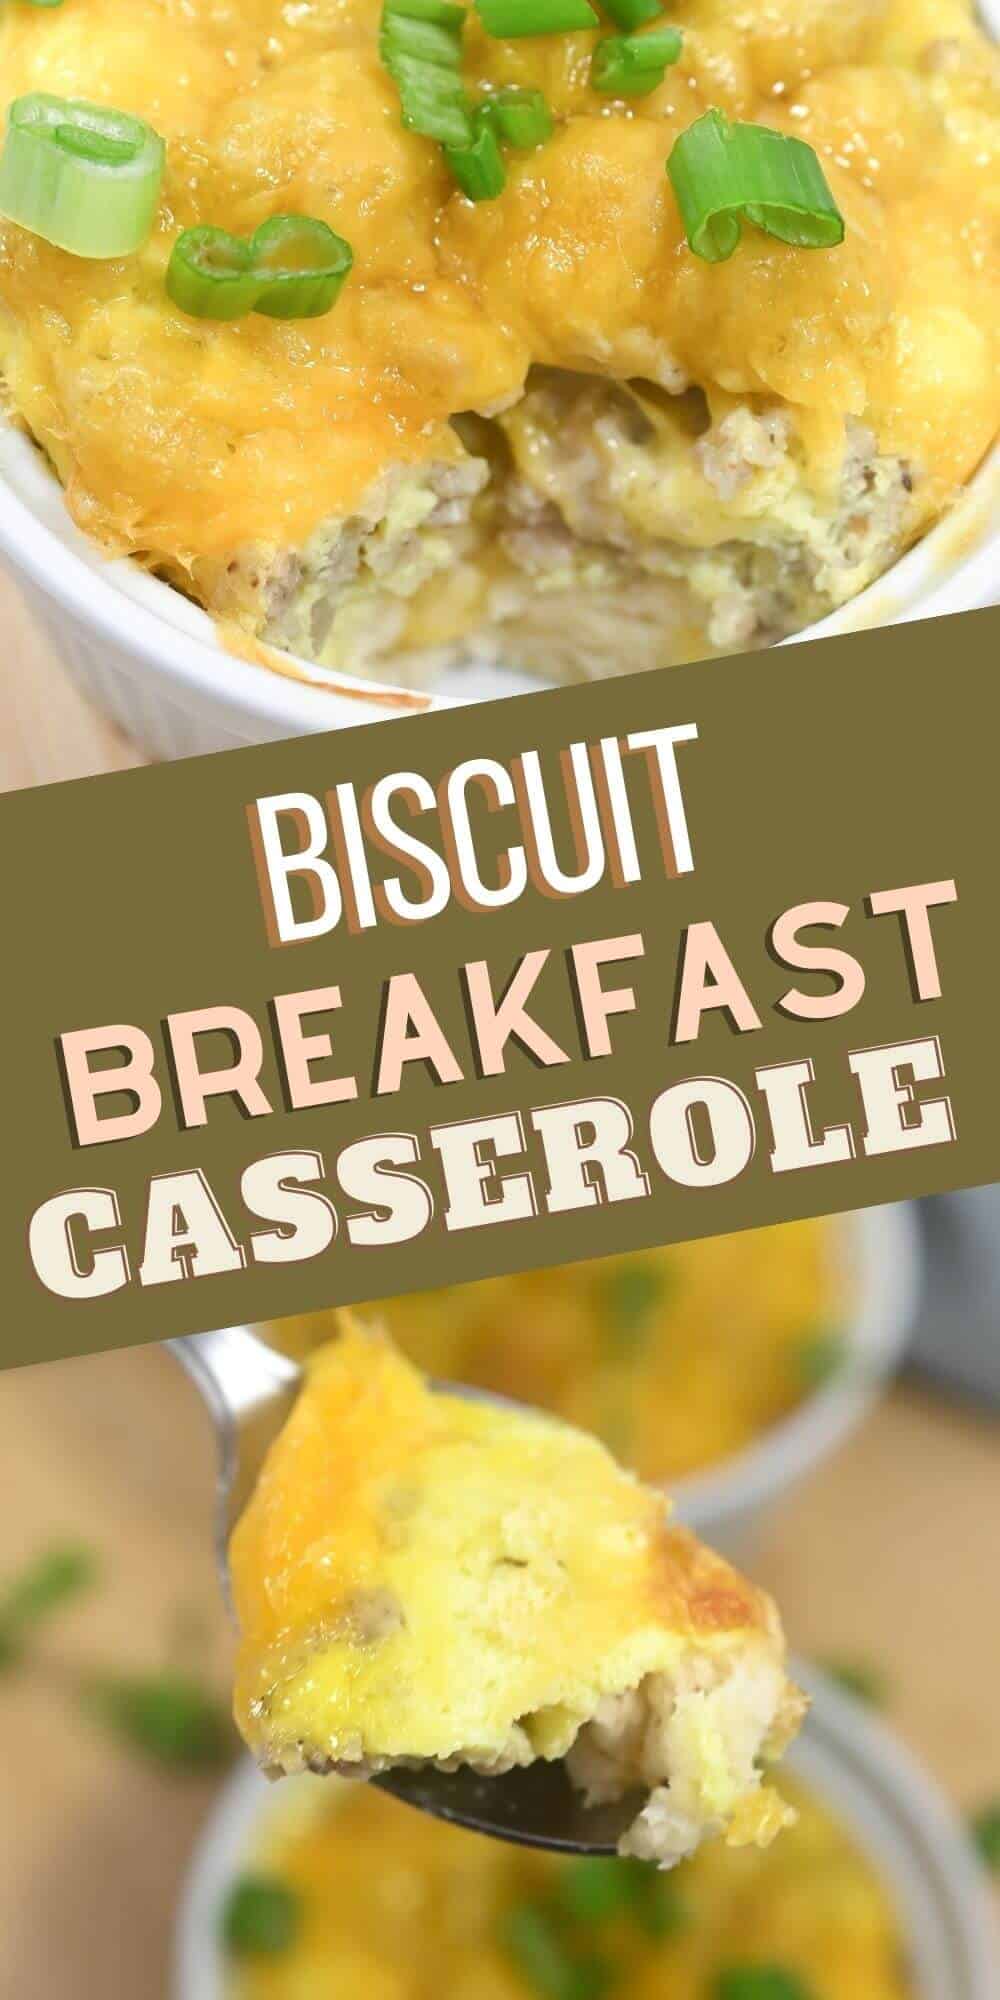 A biscuit breakfast casserole topped with melted cheese and green onions, with a serving spoon taking a portion.